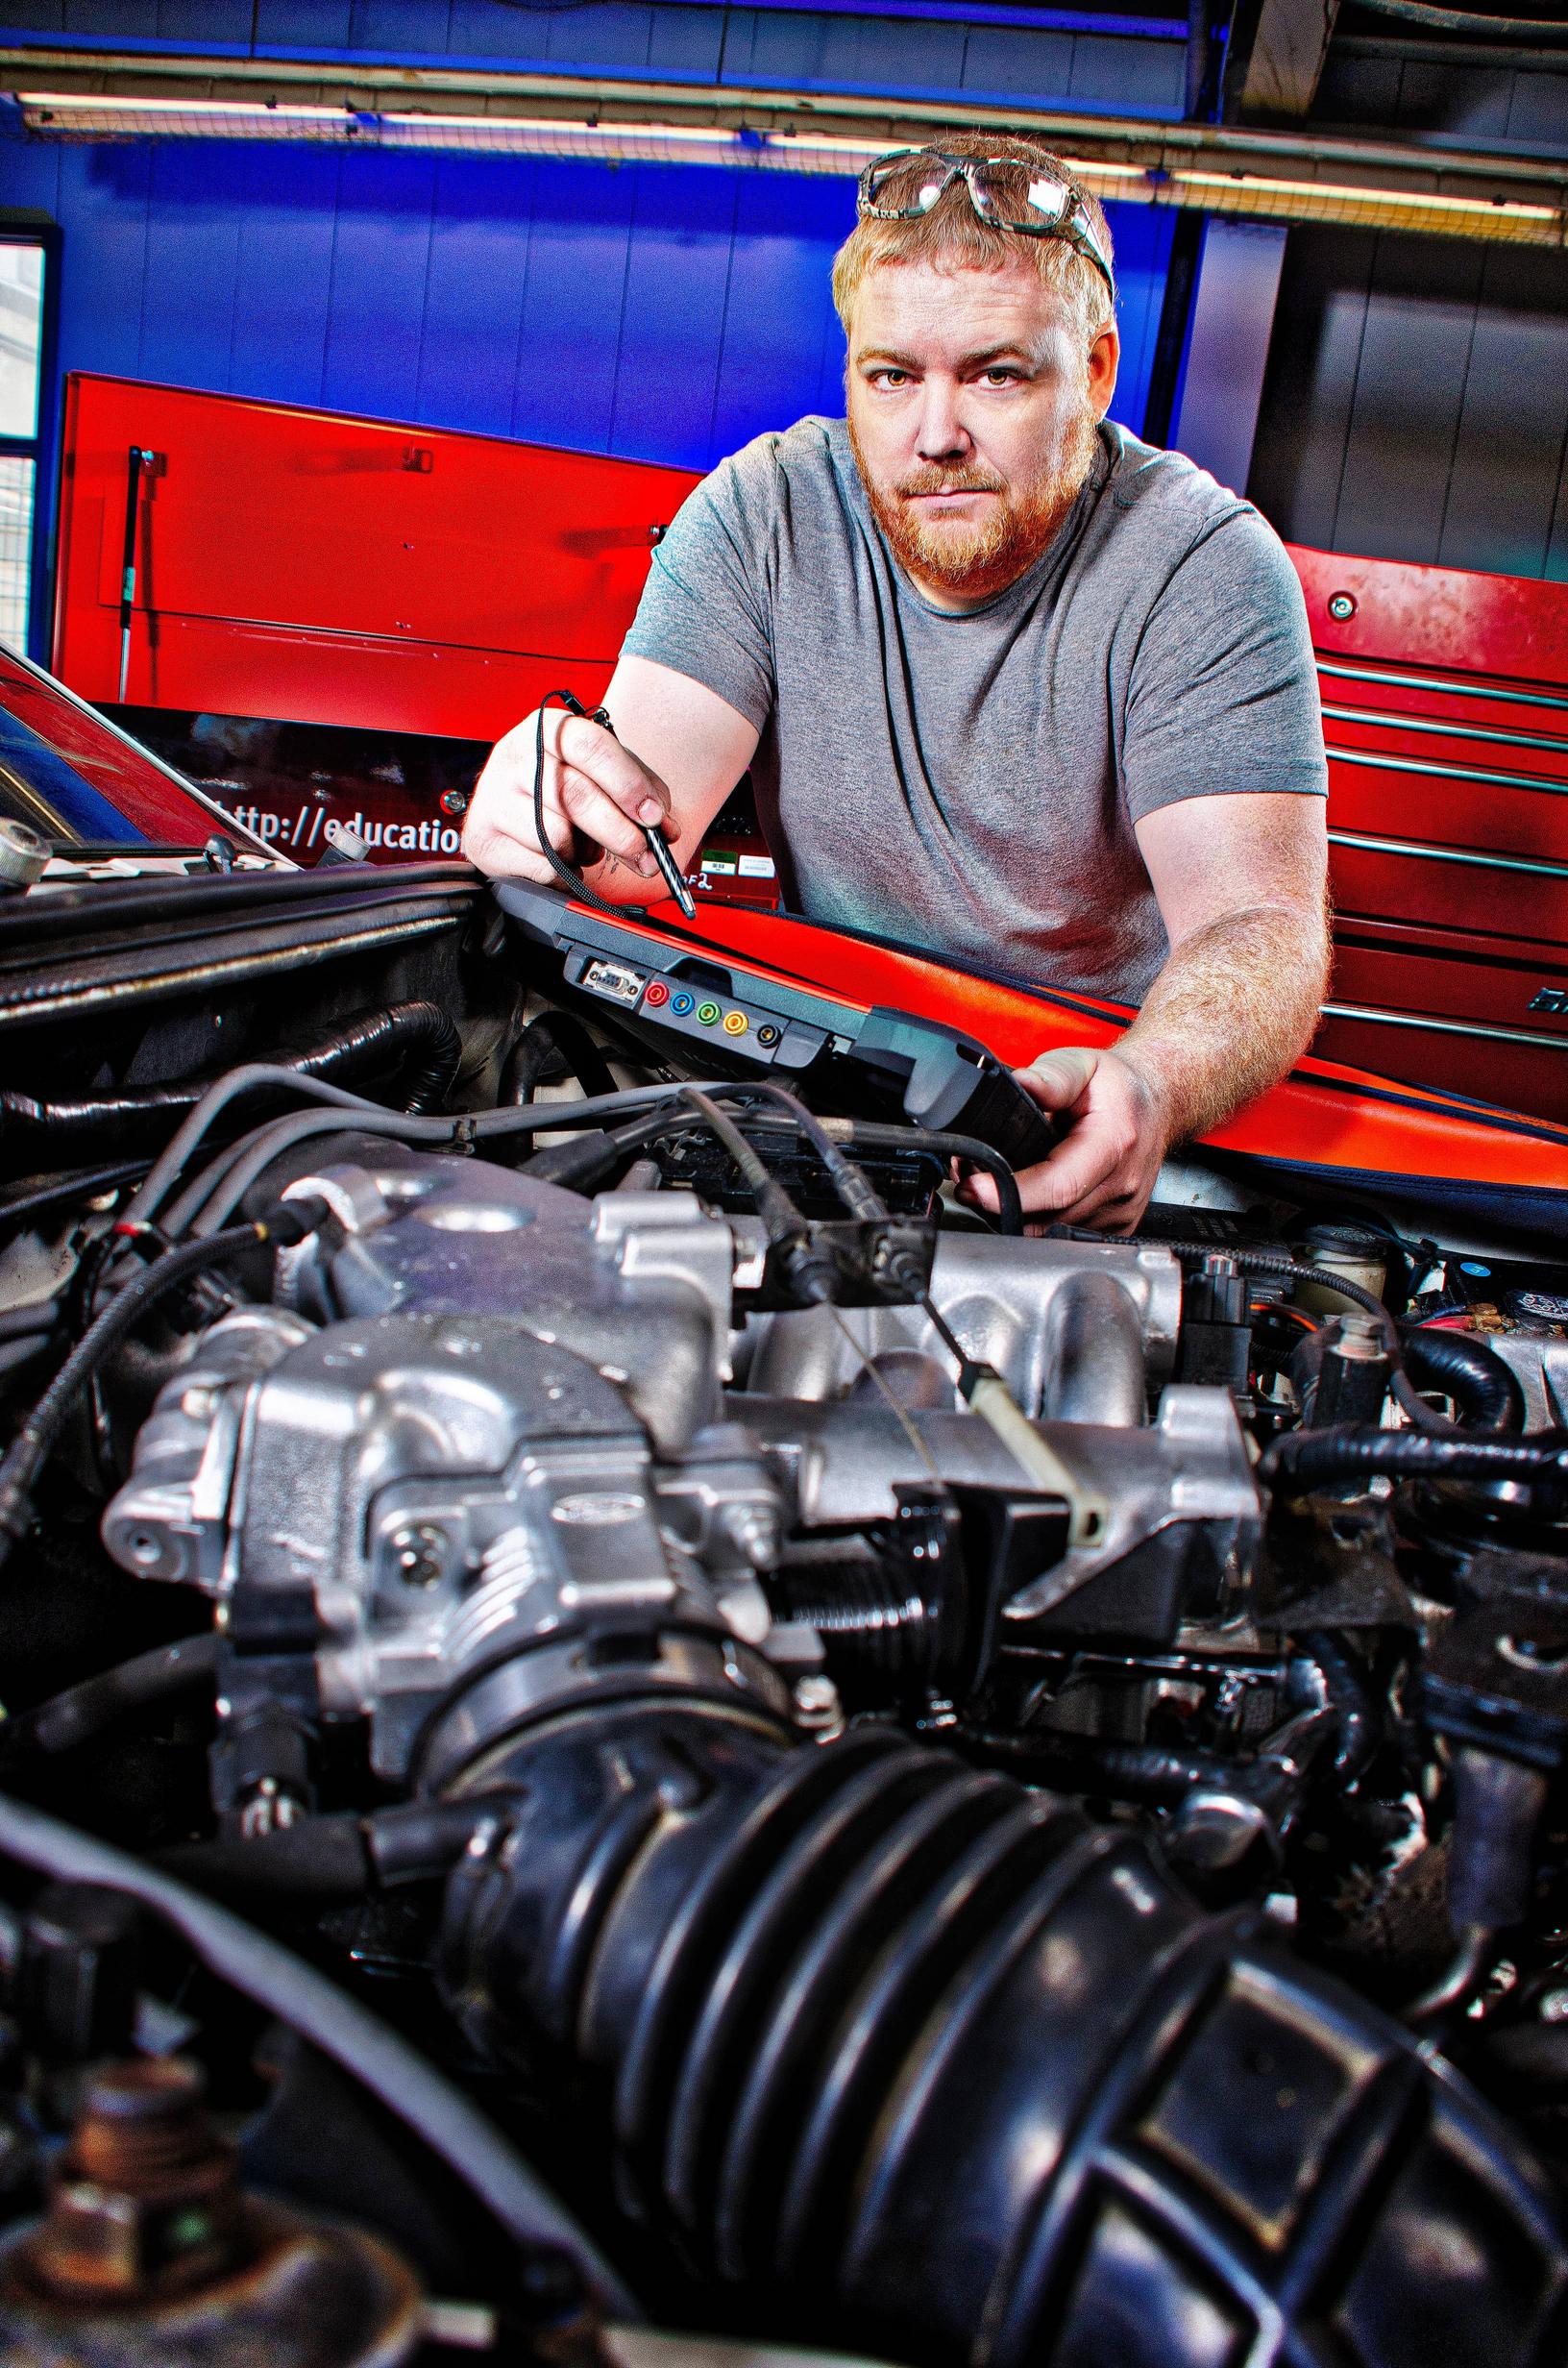 An Associate Degree in Automotive Technology Prepares Students for Entry-Level Automotive Jobs